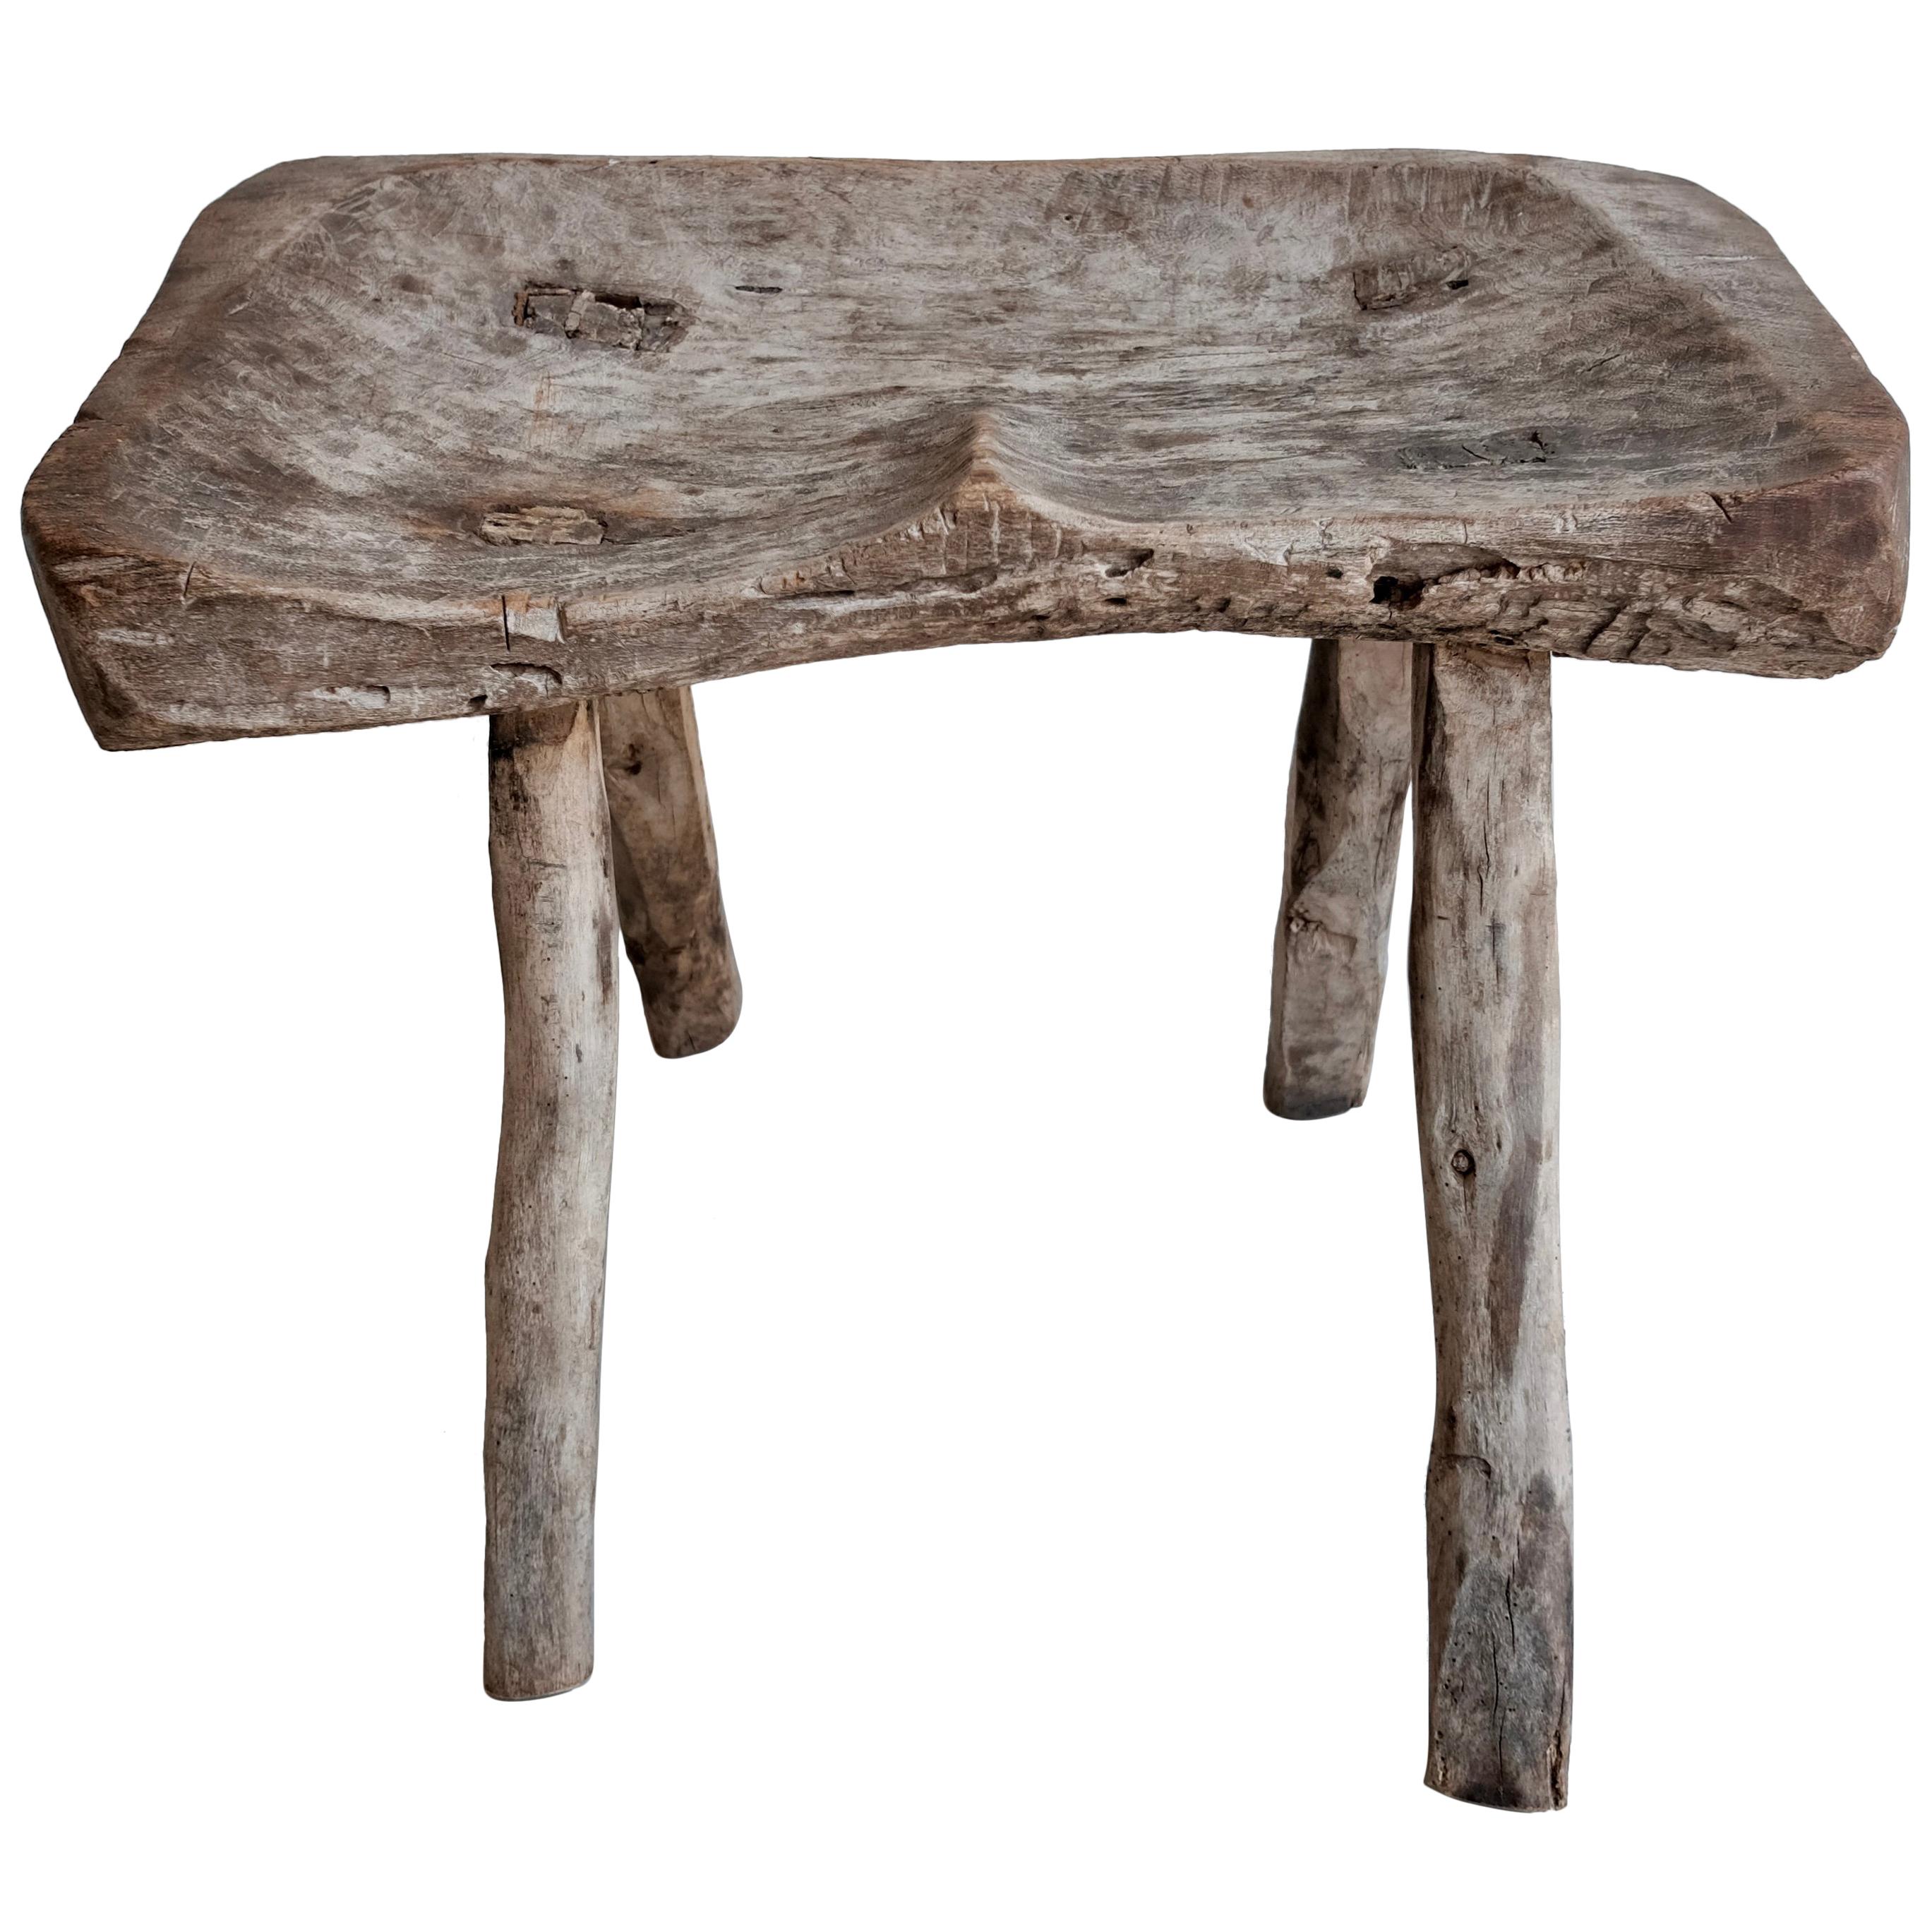 Four Legged Primitive Stool from Mexico